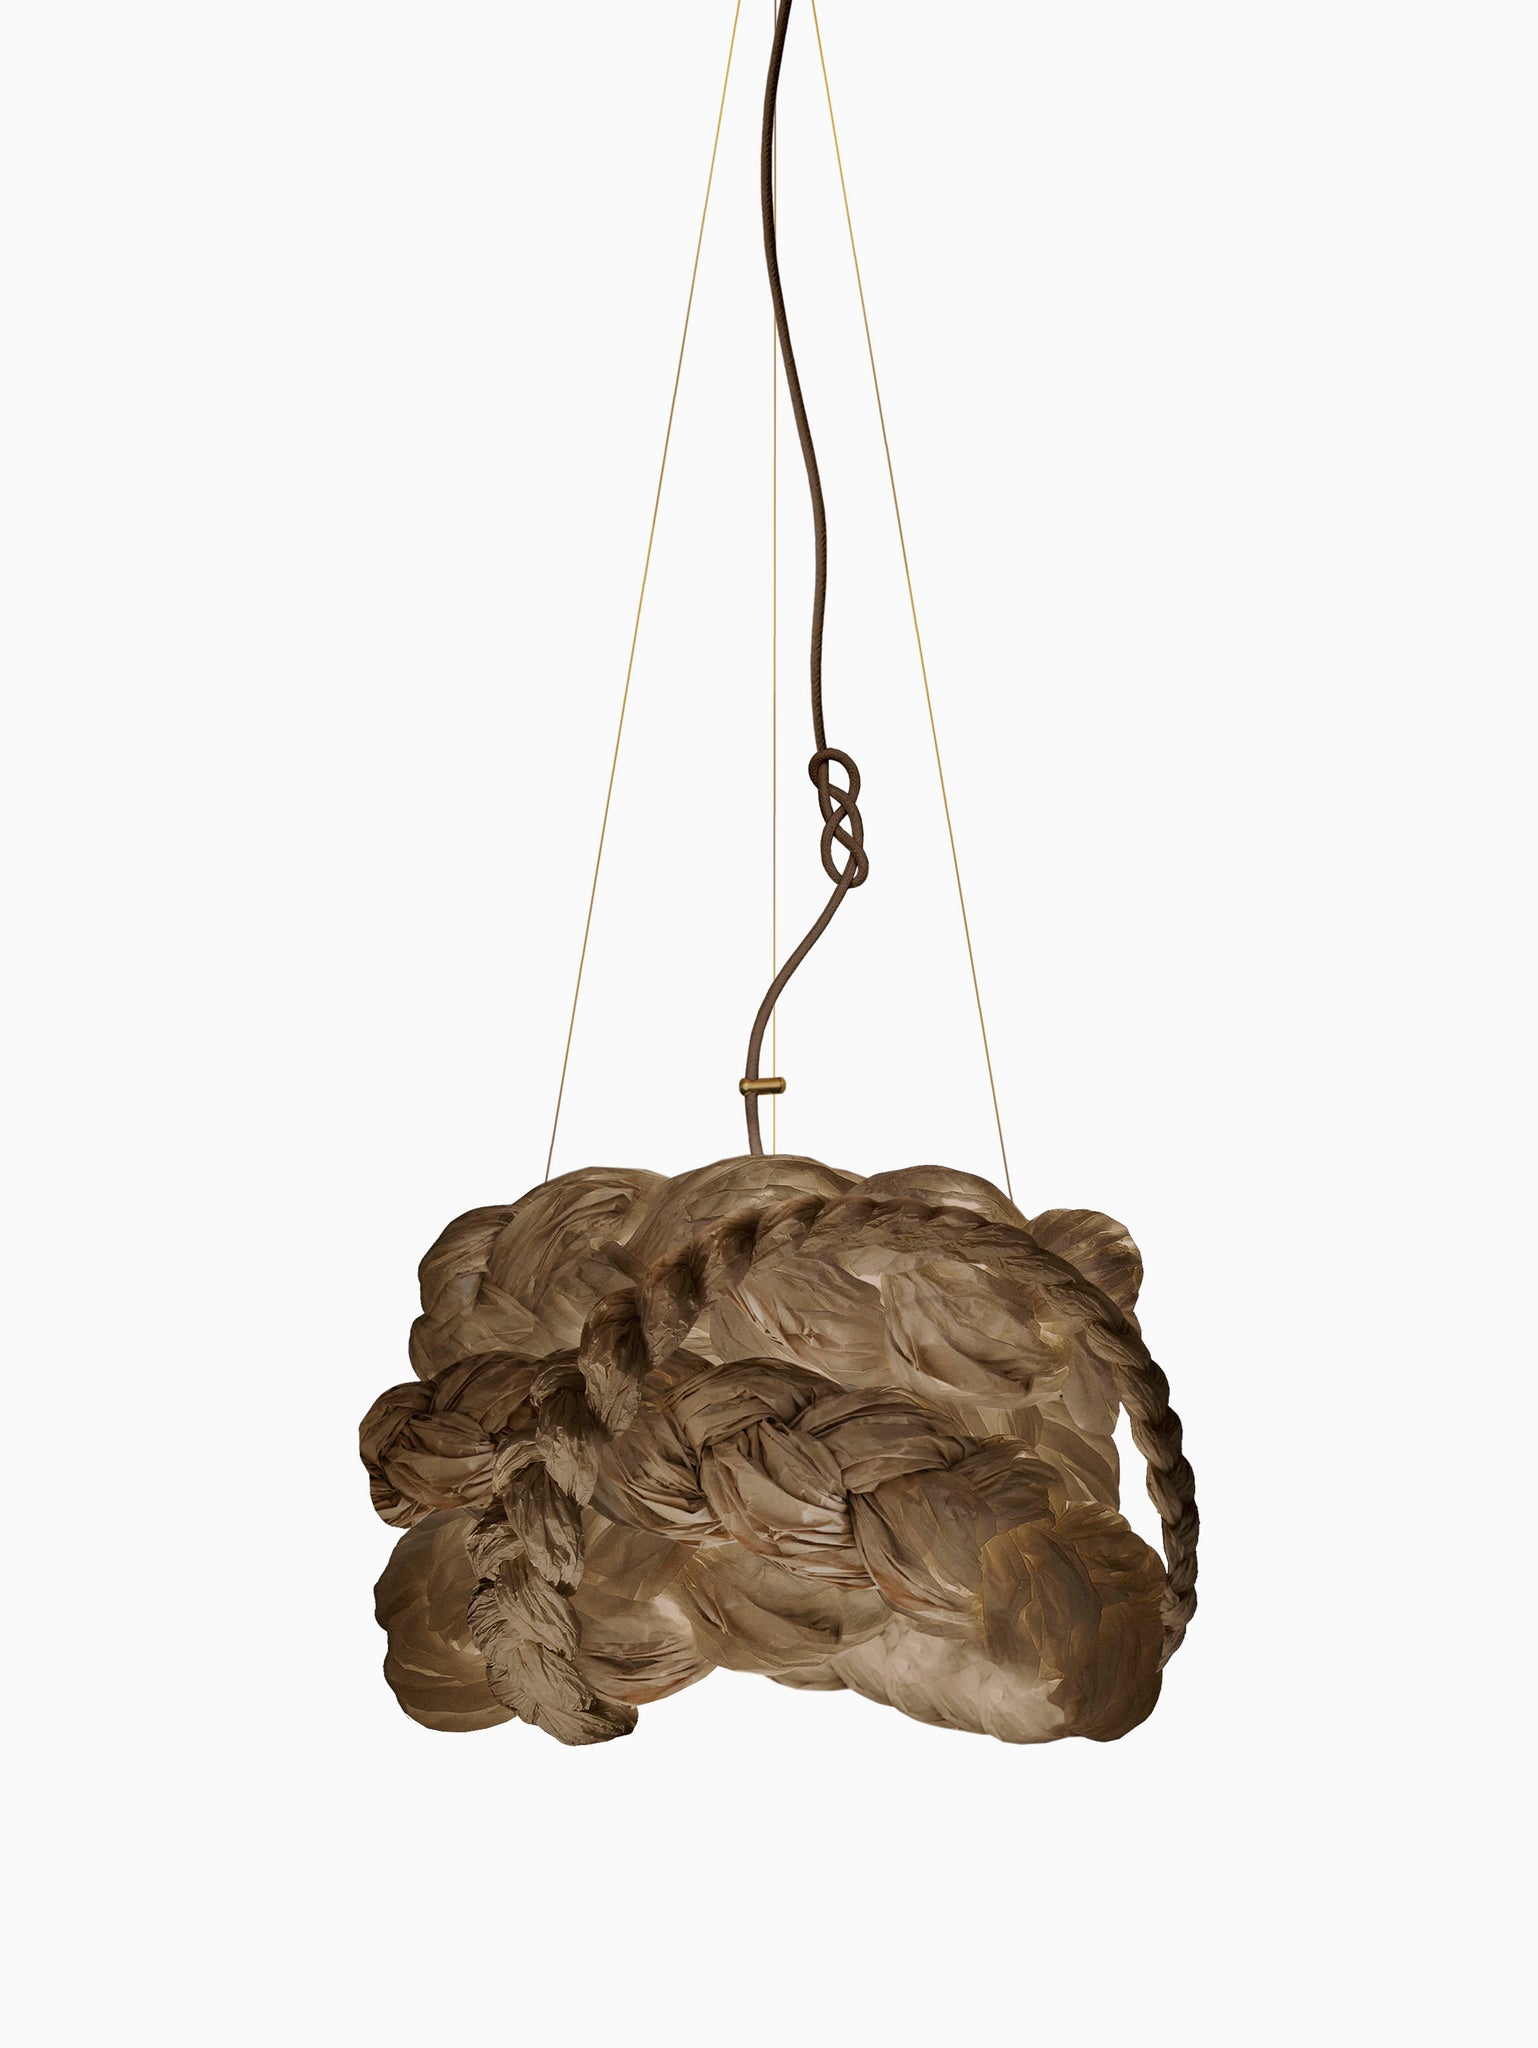 Brown Paper Braided Unique Handmade Pendant Lamp | Cozy Atmosphere Lighting | Contemporary Natural Lighting for Living room,  Bedroom & Lobby | Sustainable Design Lighting | mammalampa The Bride suspension lamp S